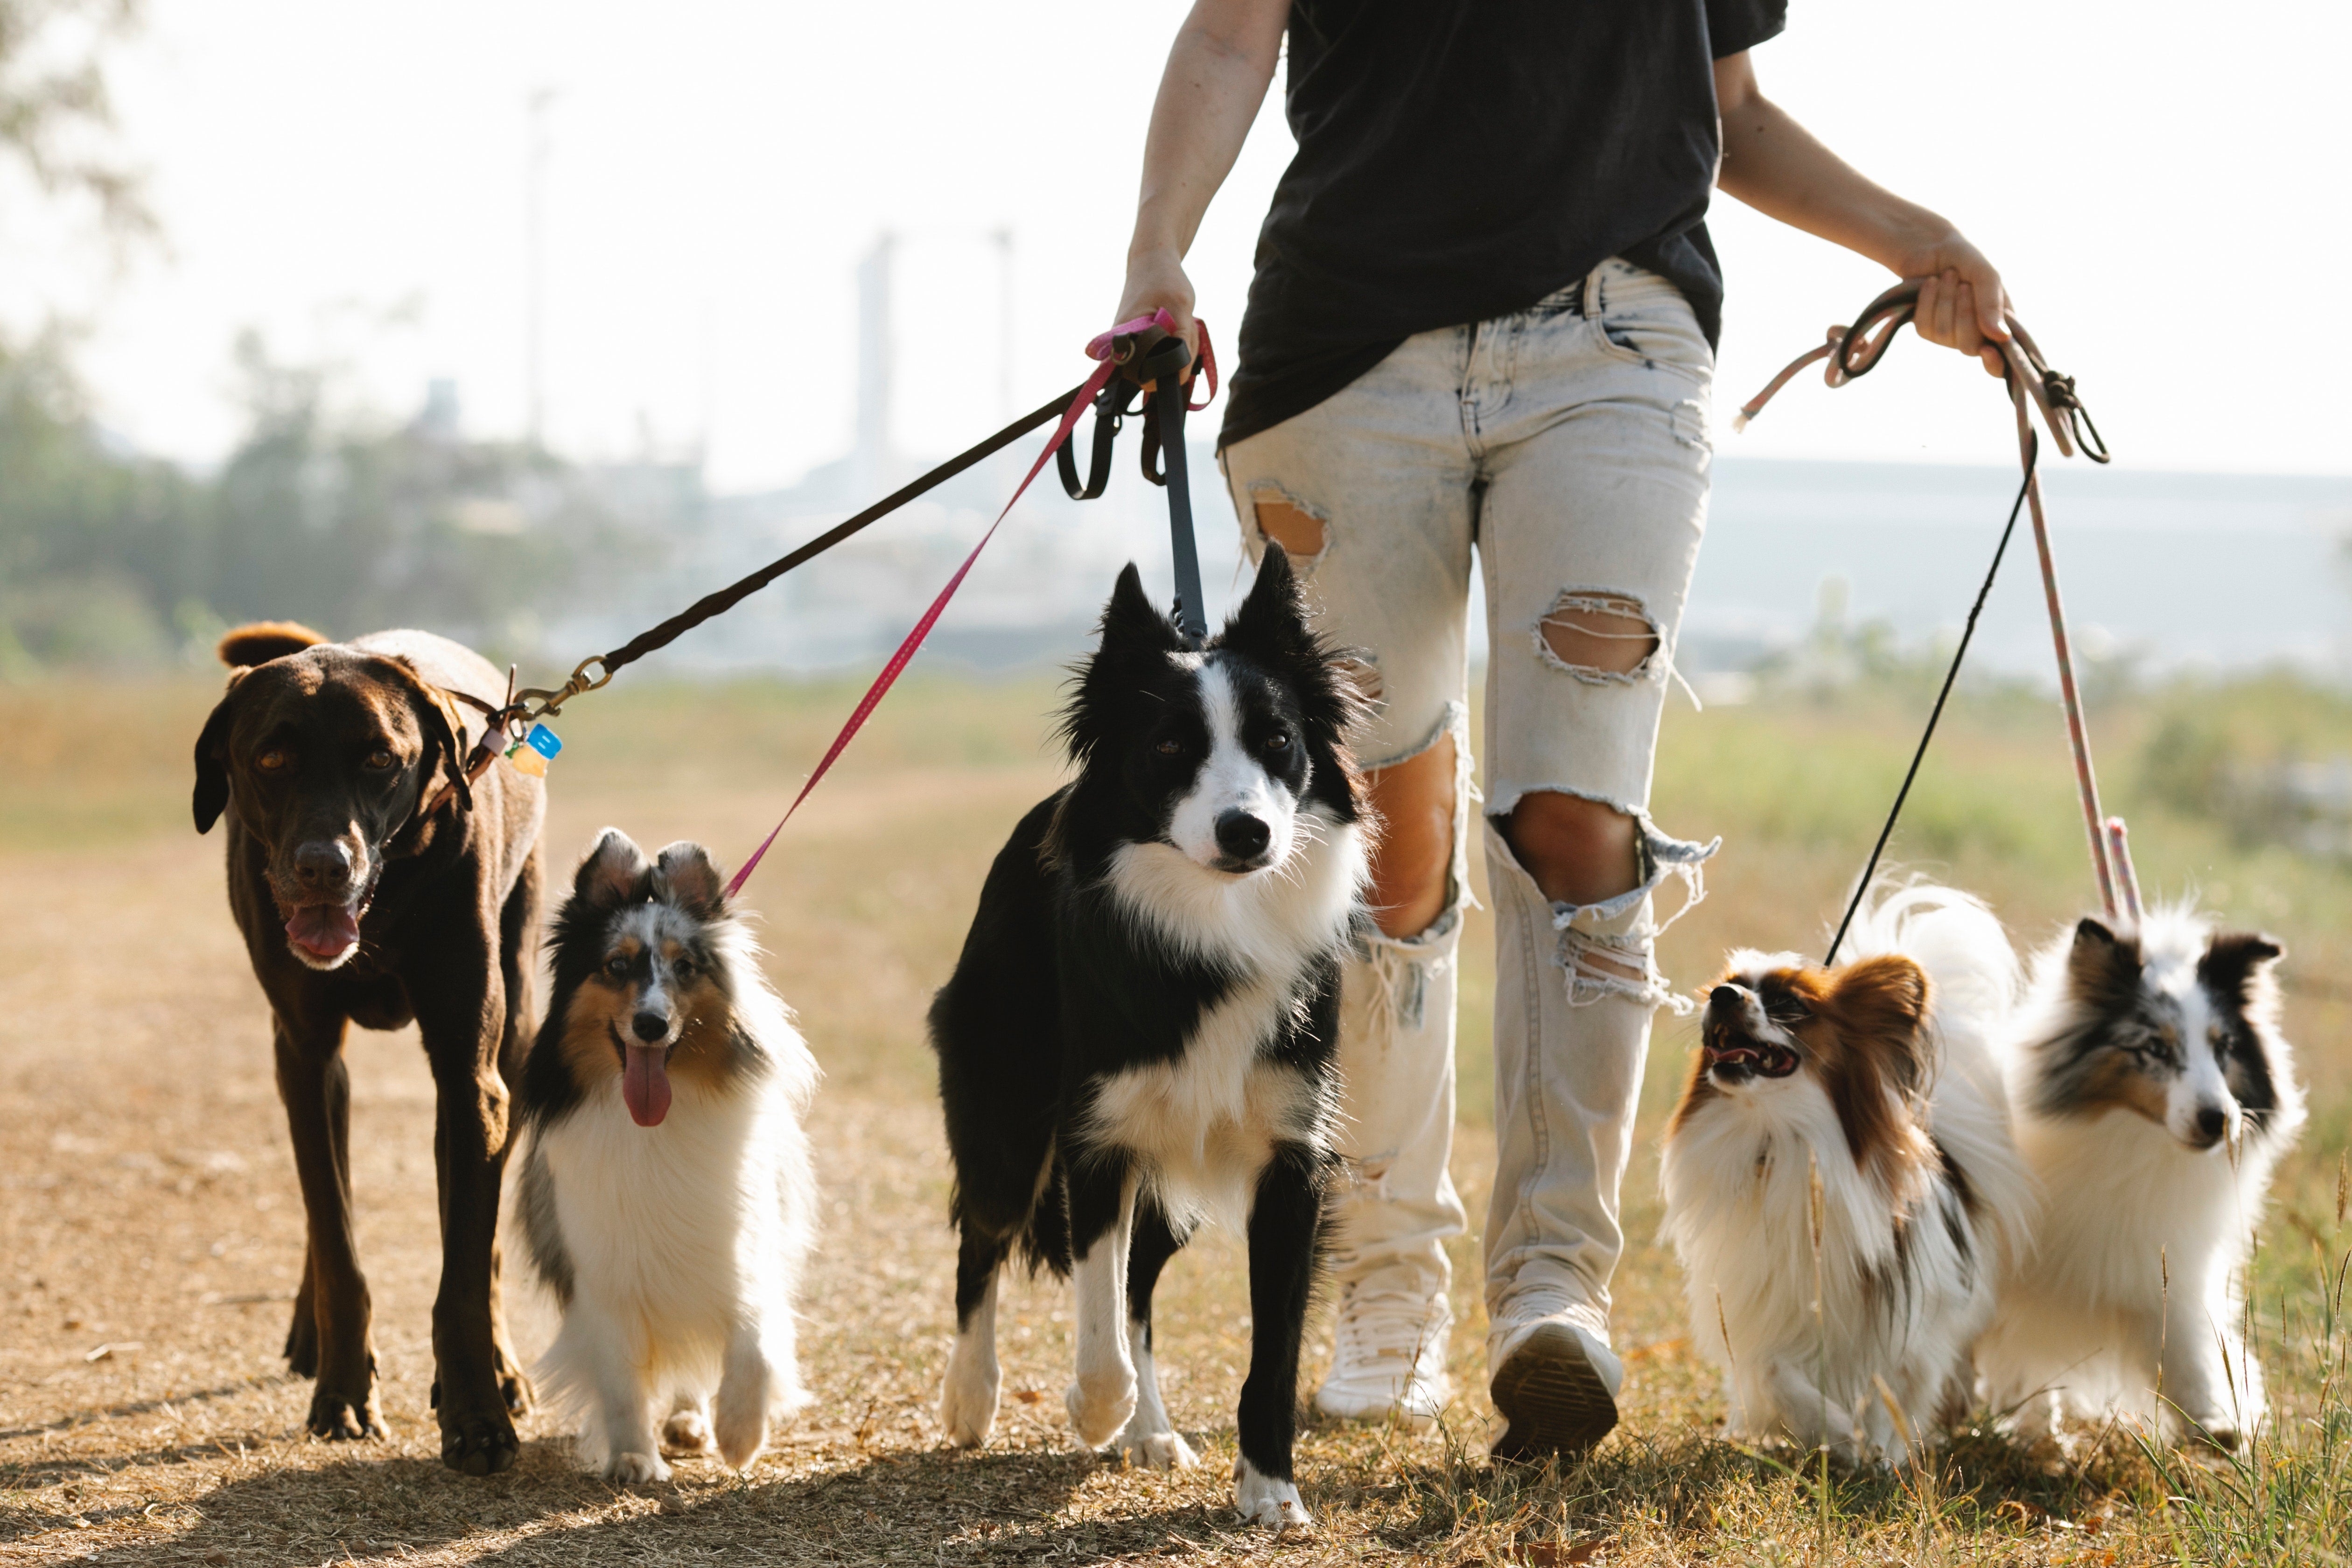 A group of five dogs, left to right brown, white and brown, black and white, white and brown, and white and brown, on leashes being walked by a human with a black shirt and ripped light wash jeans.